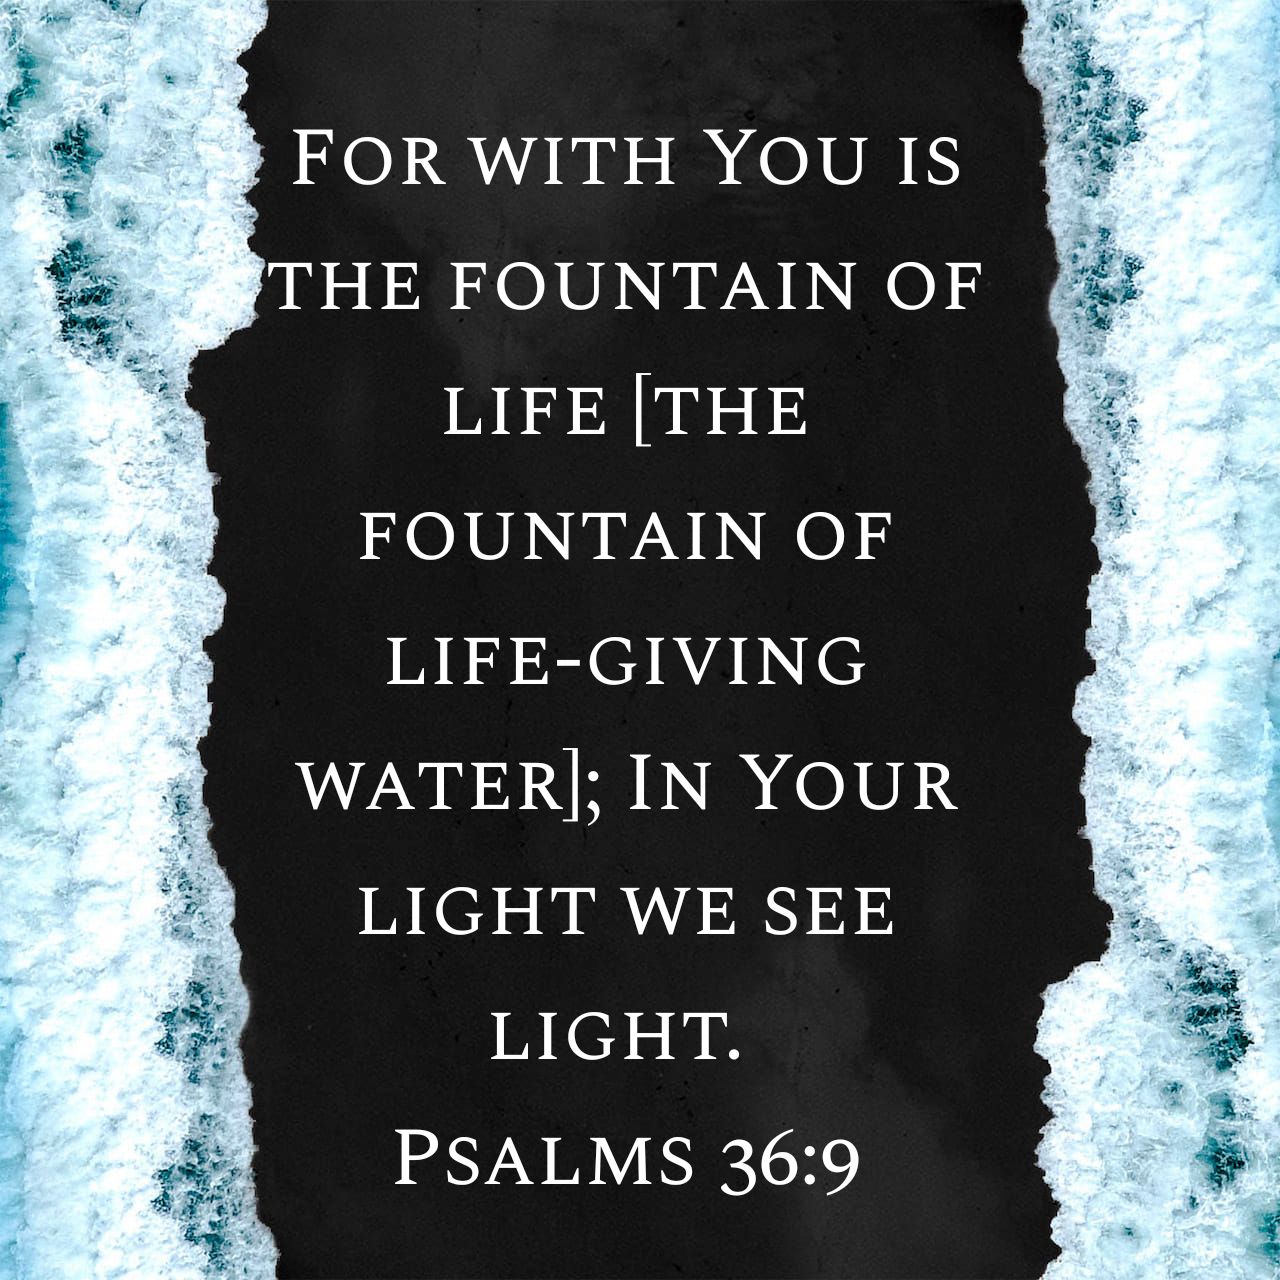 Darasimi Oyor En Twitter: "For With You Is The Fountain Of Life [The  Fountain Of Life-Giving Water]; In Your Light We See Light. Psalms 36:9 Amp  Https://T.co/Zqvz4Qsf1Y Https://T.co/7Pcjhqlejt" / Twitter